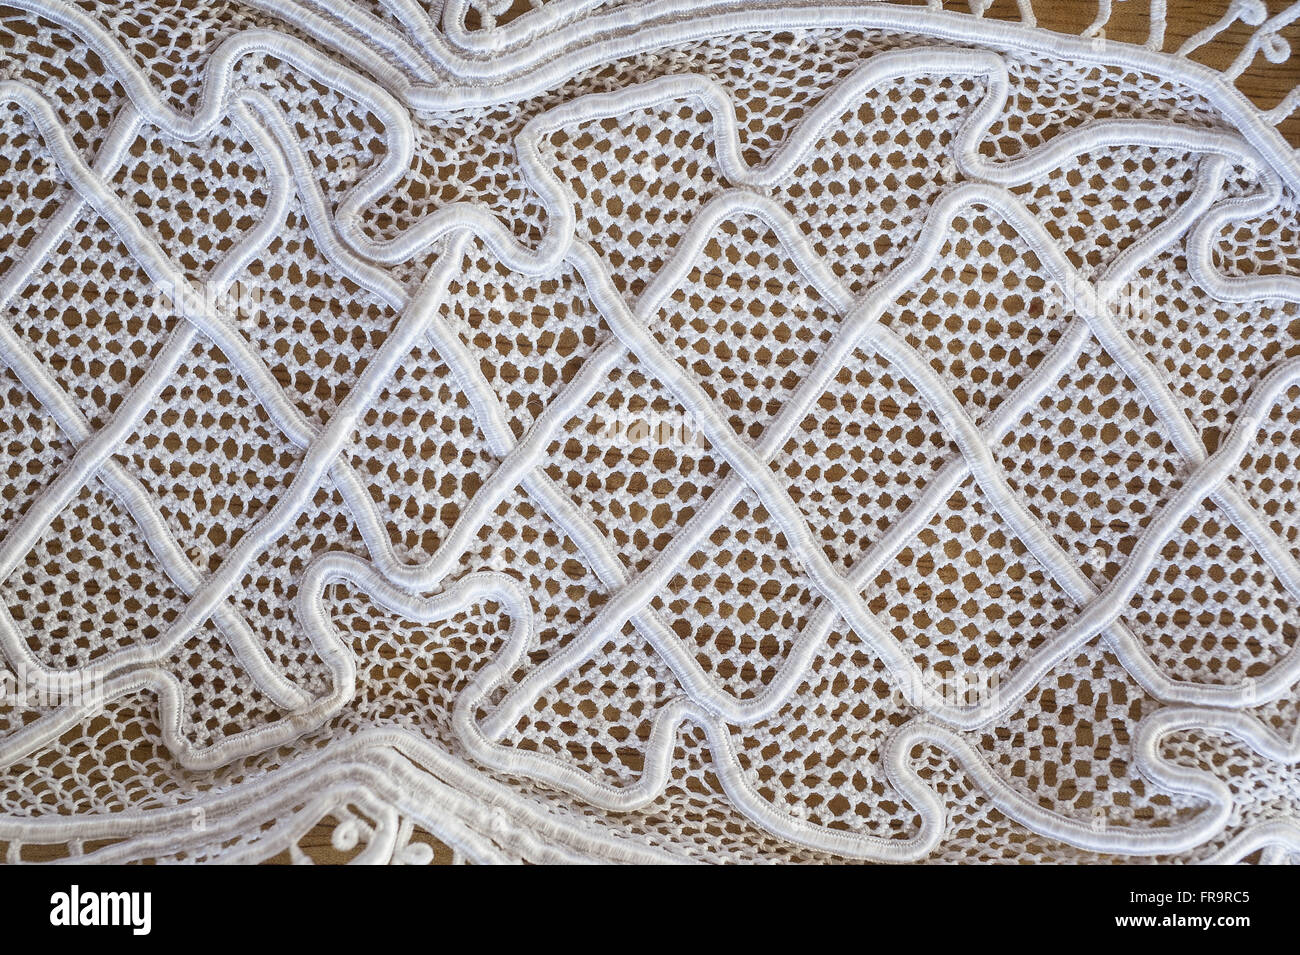 Irish Lace High Resolution Stock Photography and Images - Alamy